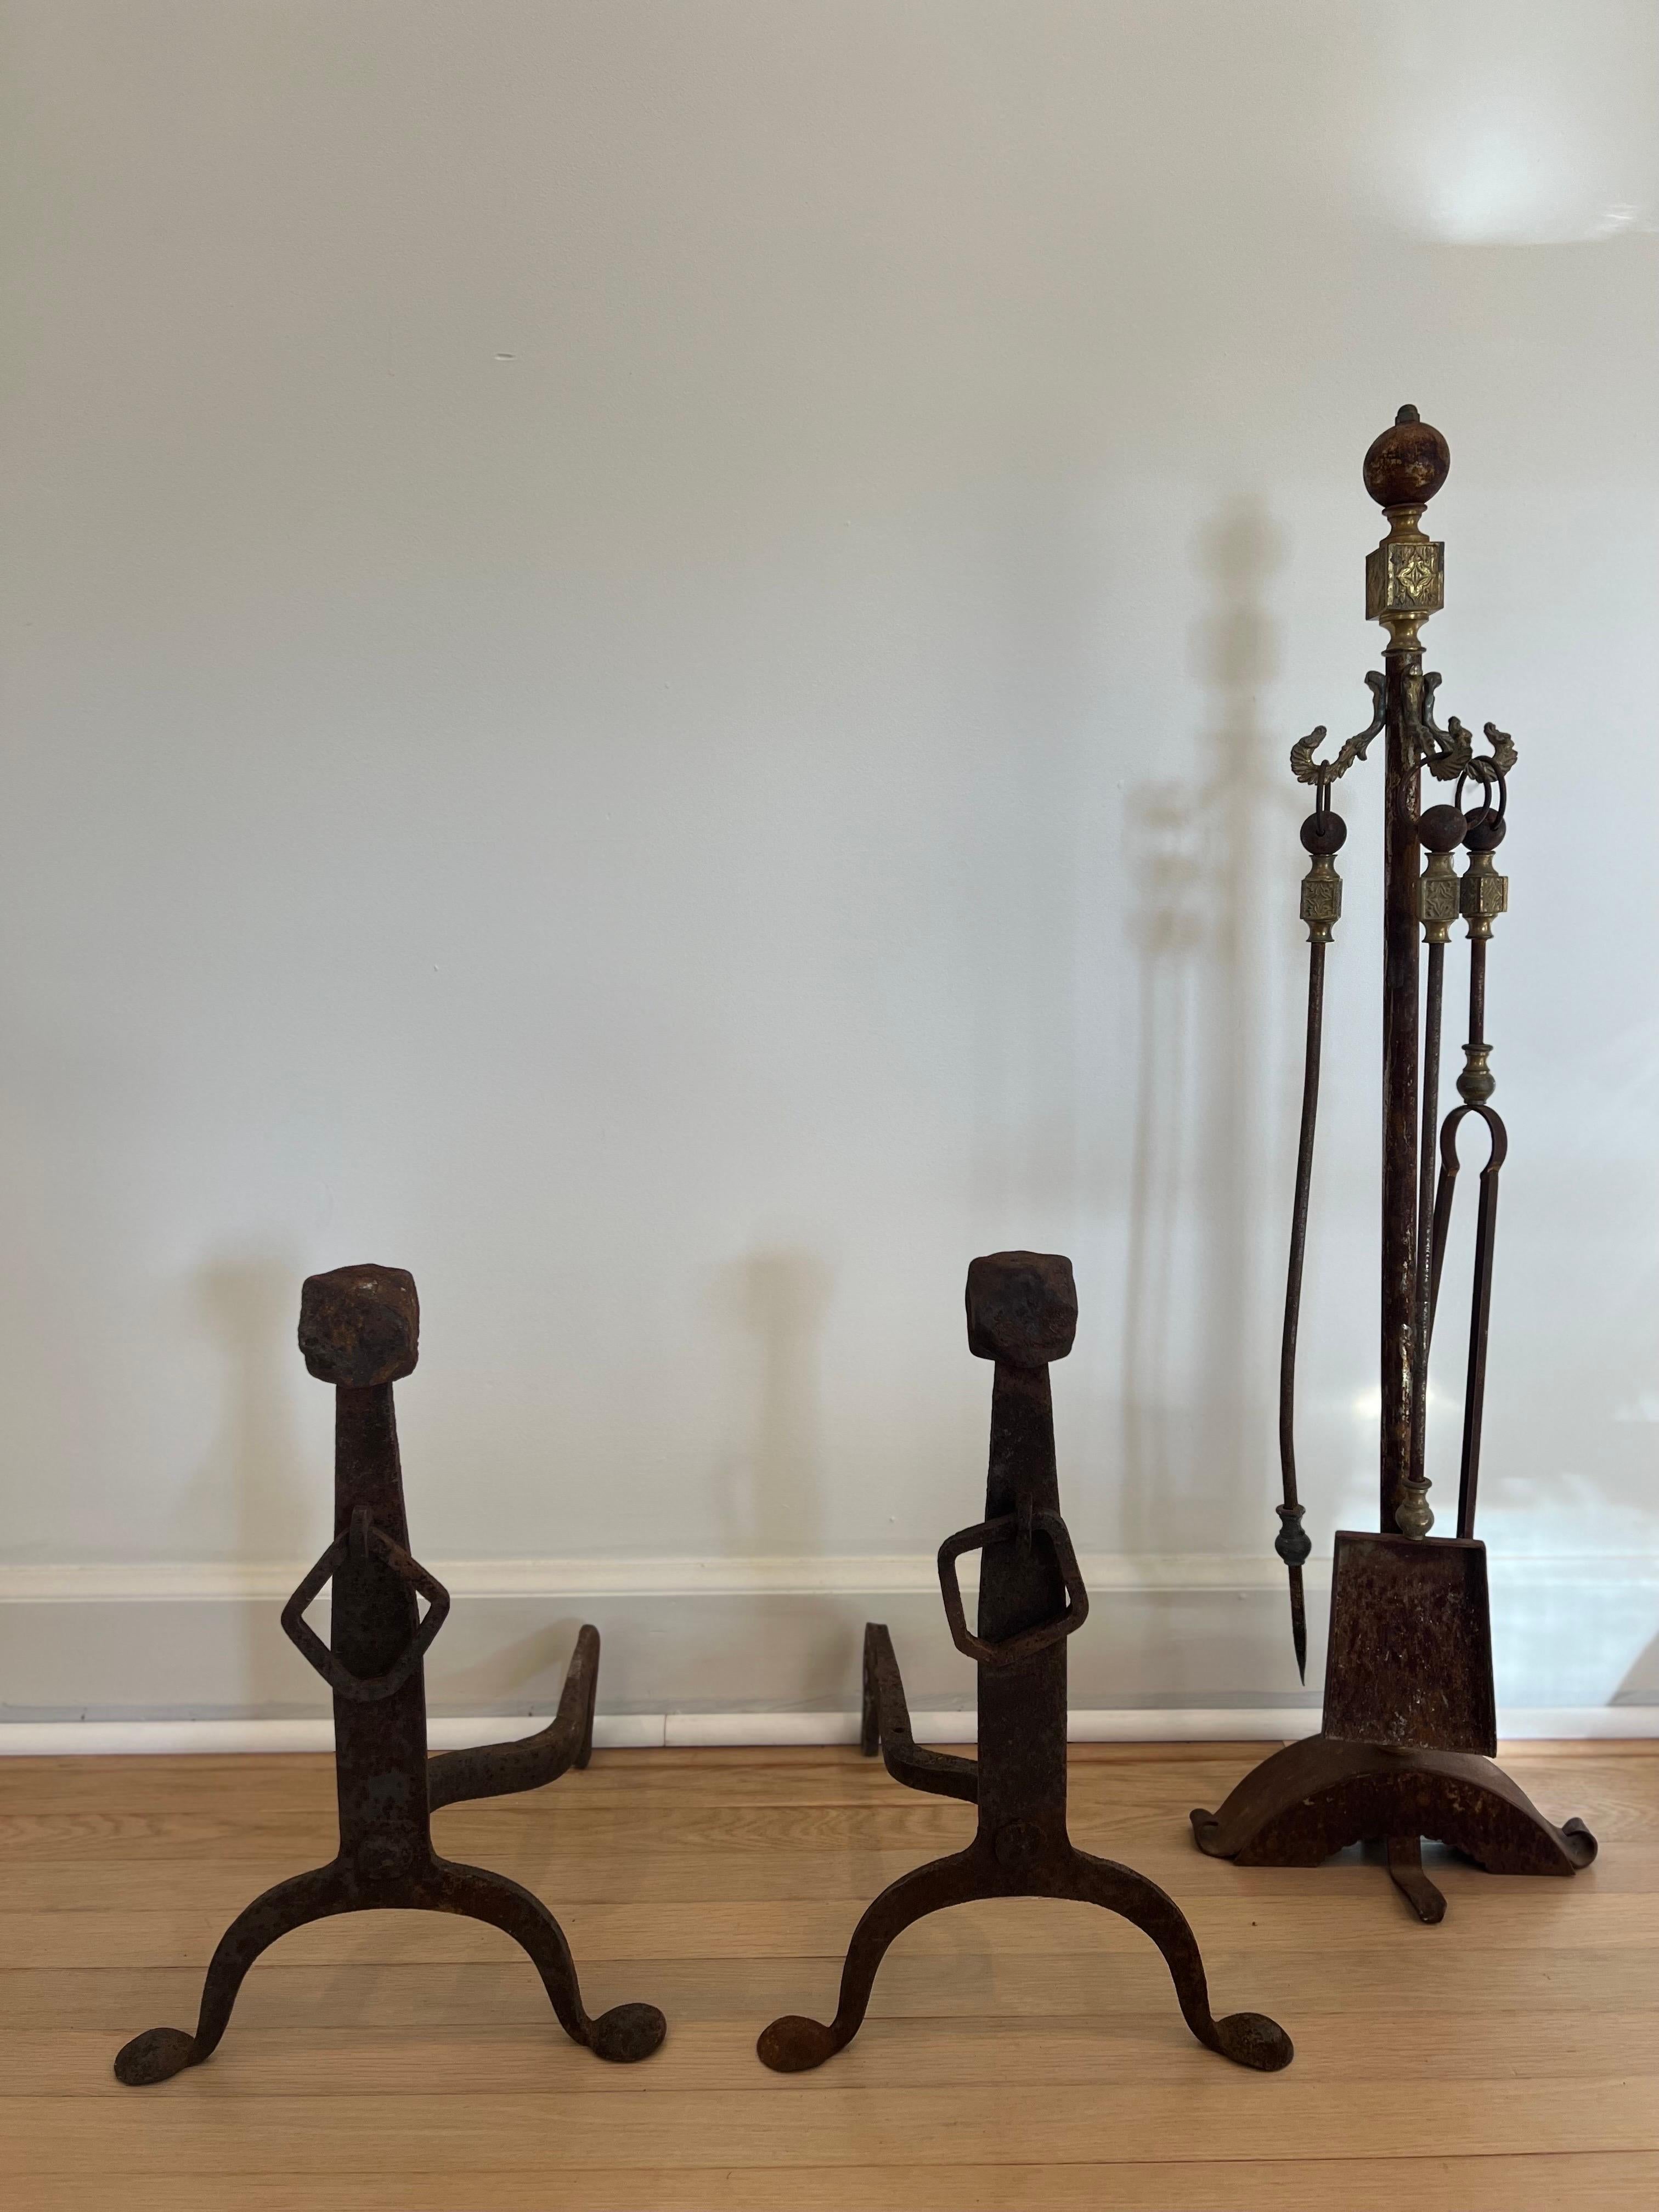 Exceptional and unique set of fireplace tools including andirons. 
Iron shows years of patina adding to the aged beauty of this set. 

Acquired on a trip to Europe from old estate.